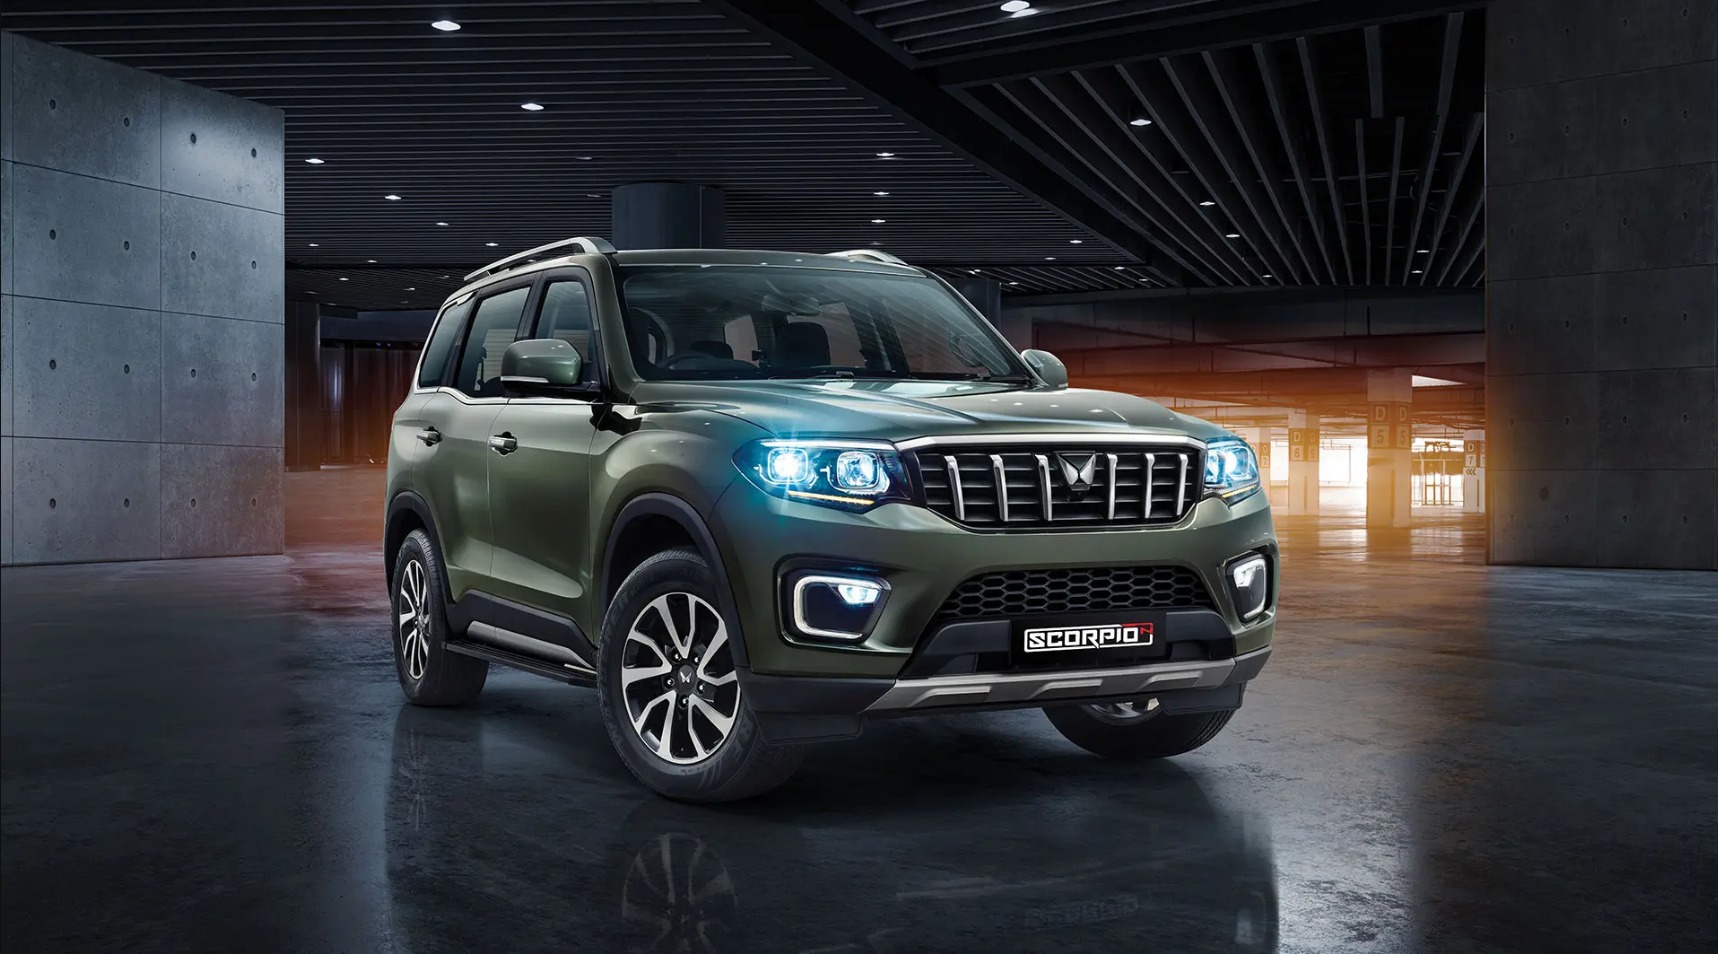 Unleash the power of N with the All-New Scorpio N for Sale in South Africa